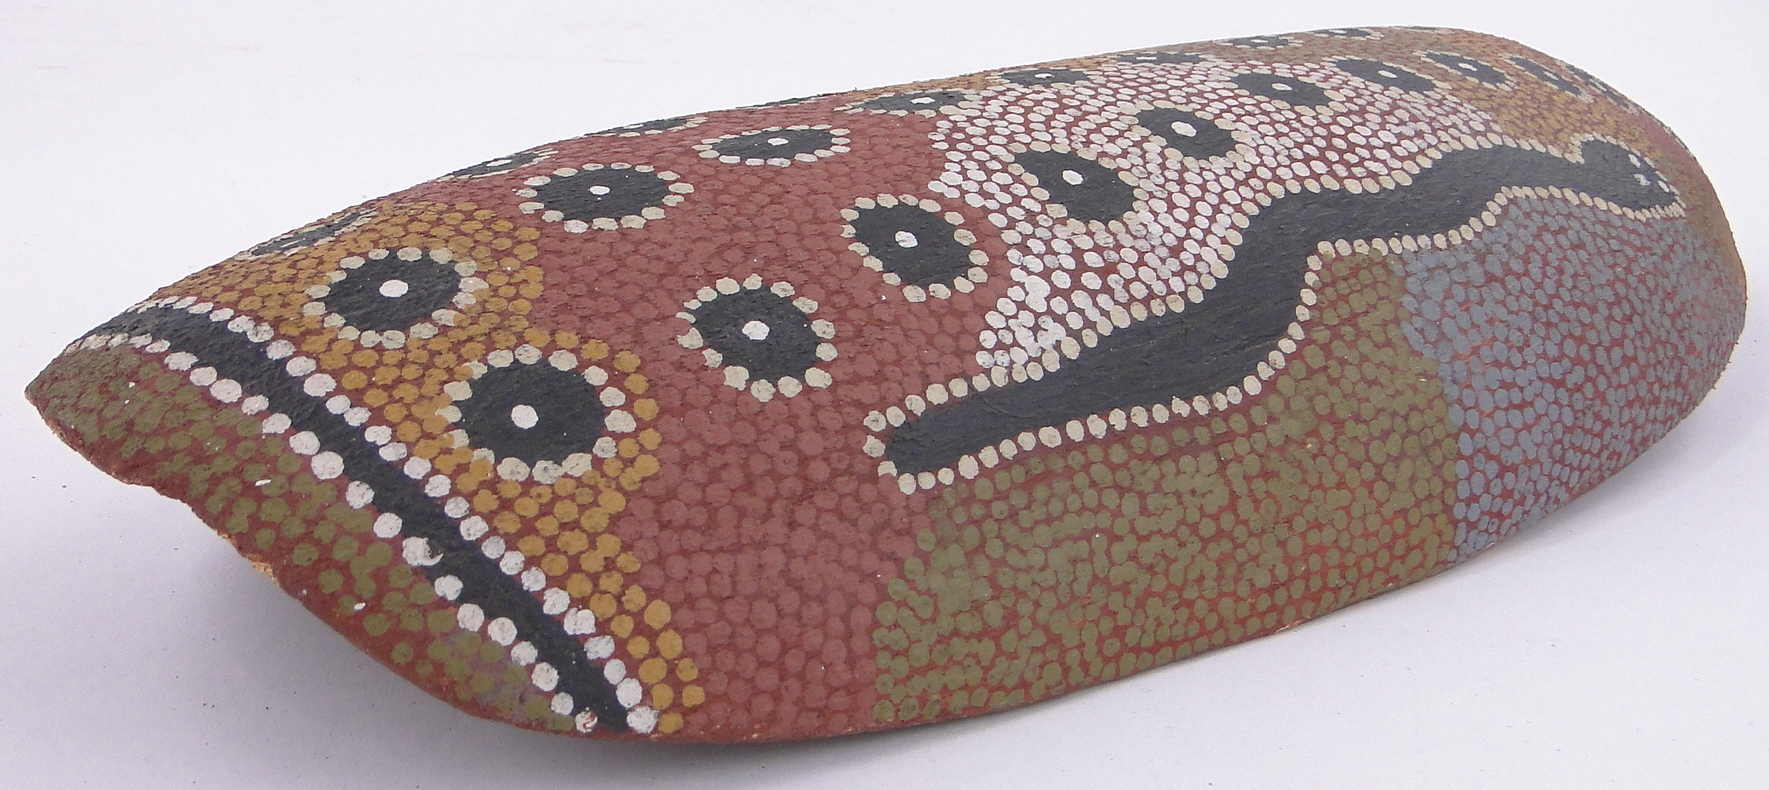 An Australian Aboriginal wood wall hanging, with painted snake designs, length 15.5". - Image 2 of 3